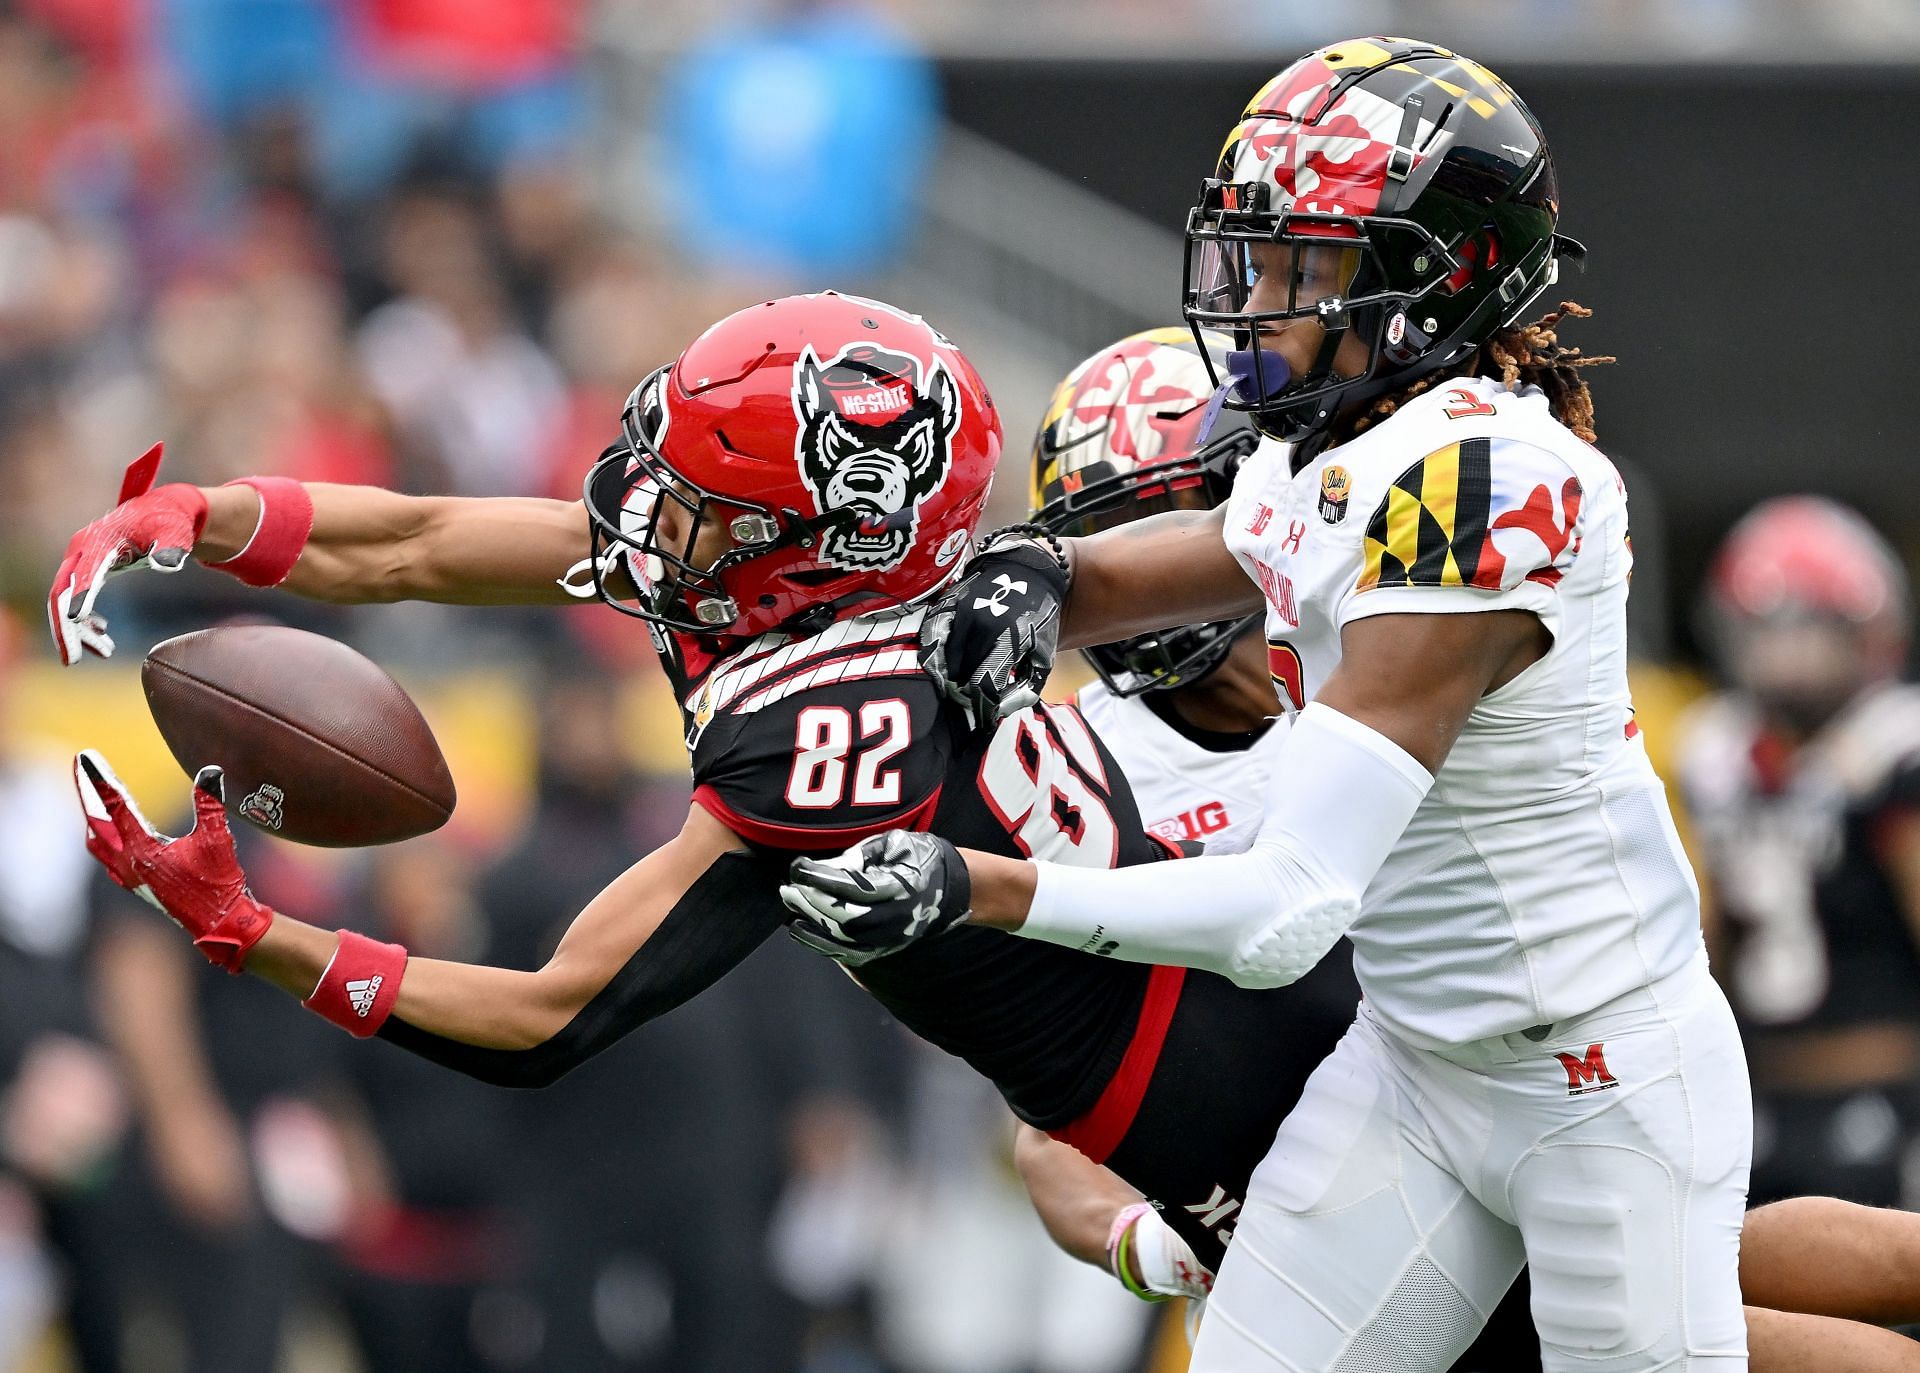 Deonte Banks #3 of the Maryland Terrapins defends a pass to Terrell Timmons Jr. #82 of the North Carolina State Wolfpack